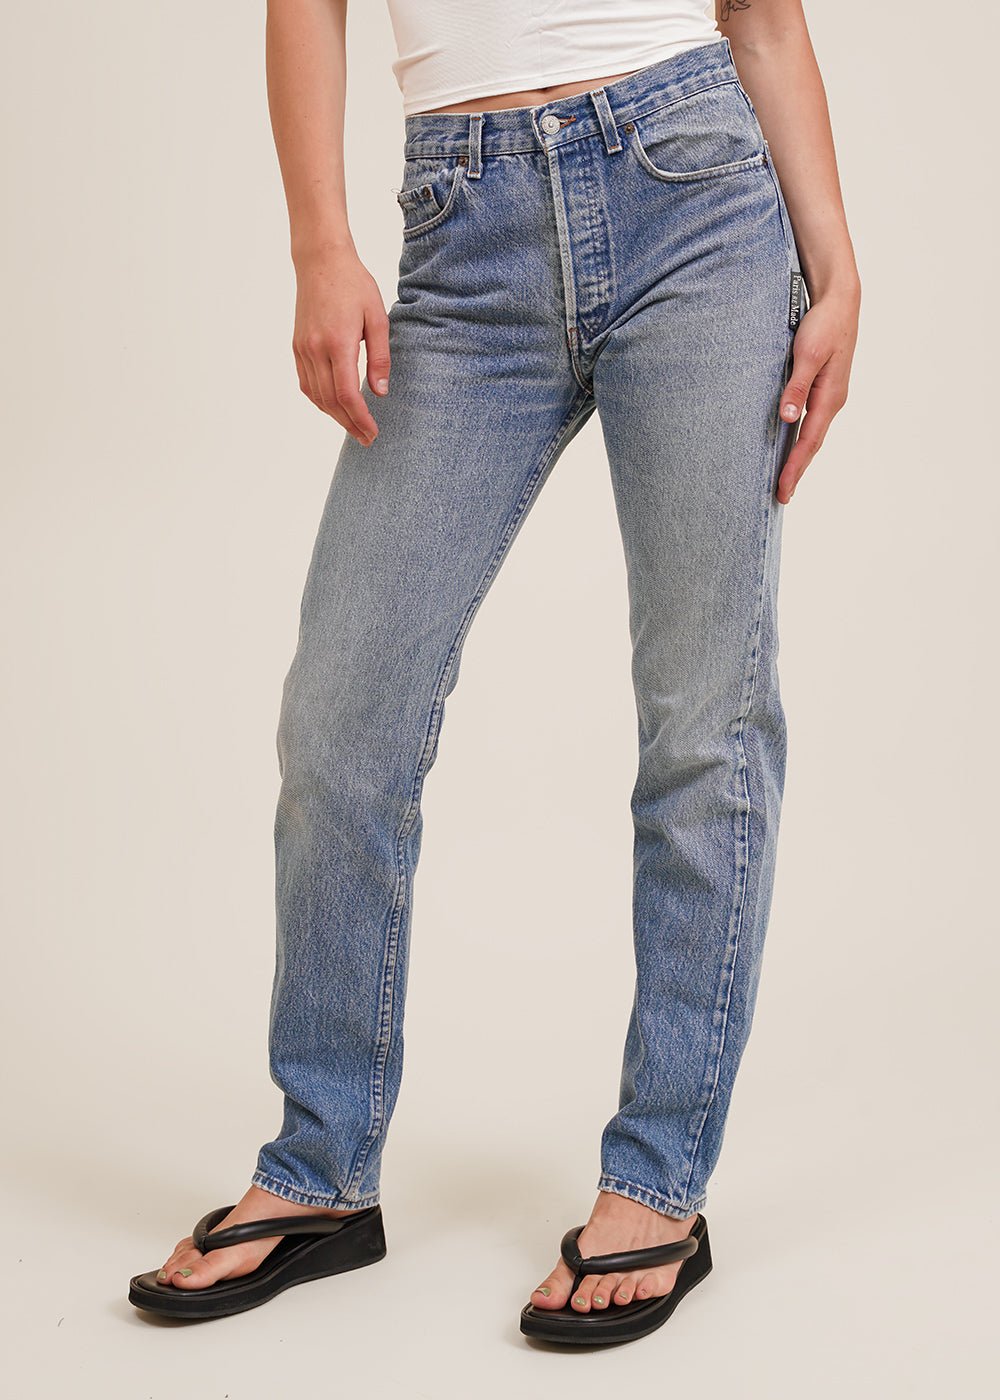 Paris RE Made Vintage Back Eyelet Jeans - New Classics Studios Sustainable Ethical Fashion Canada